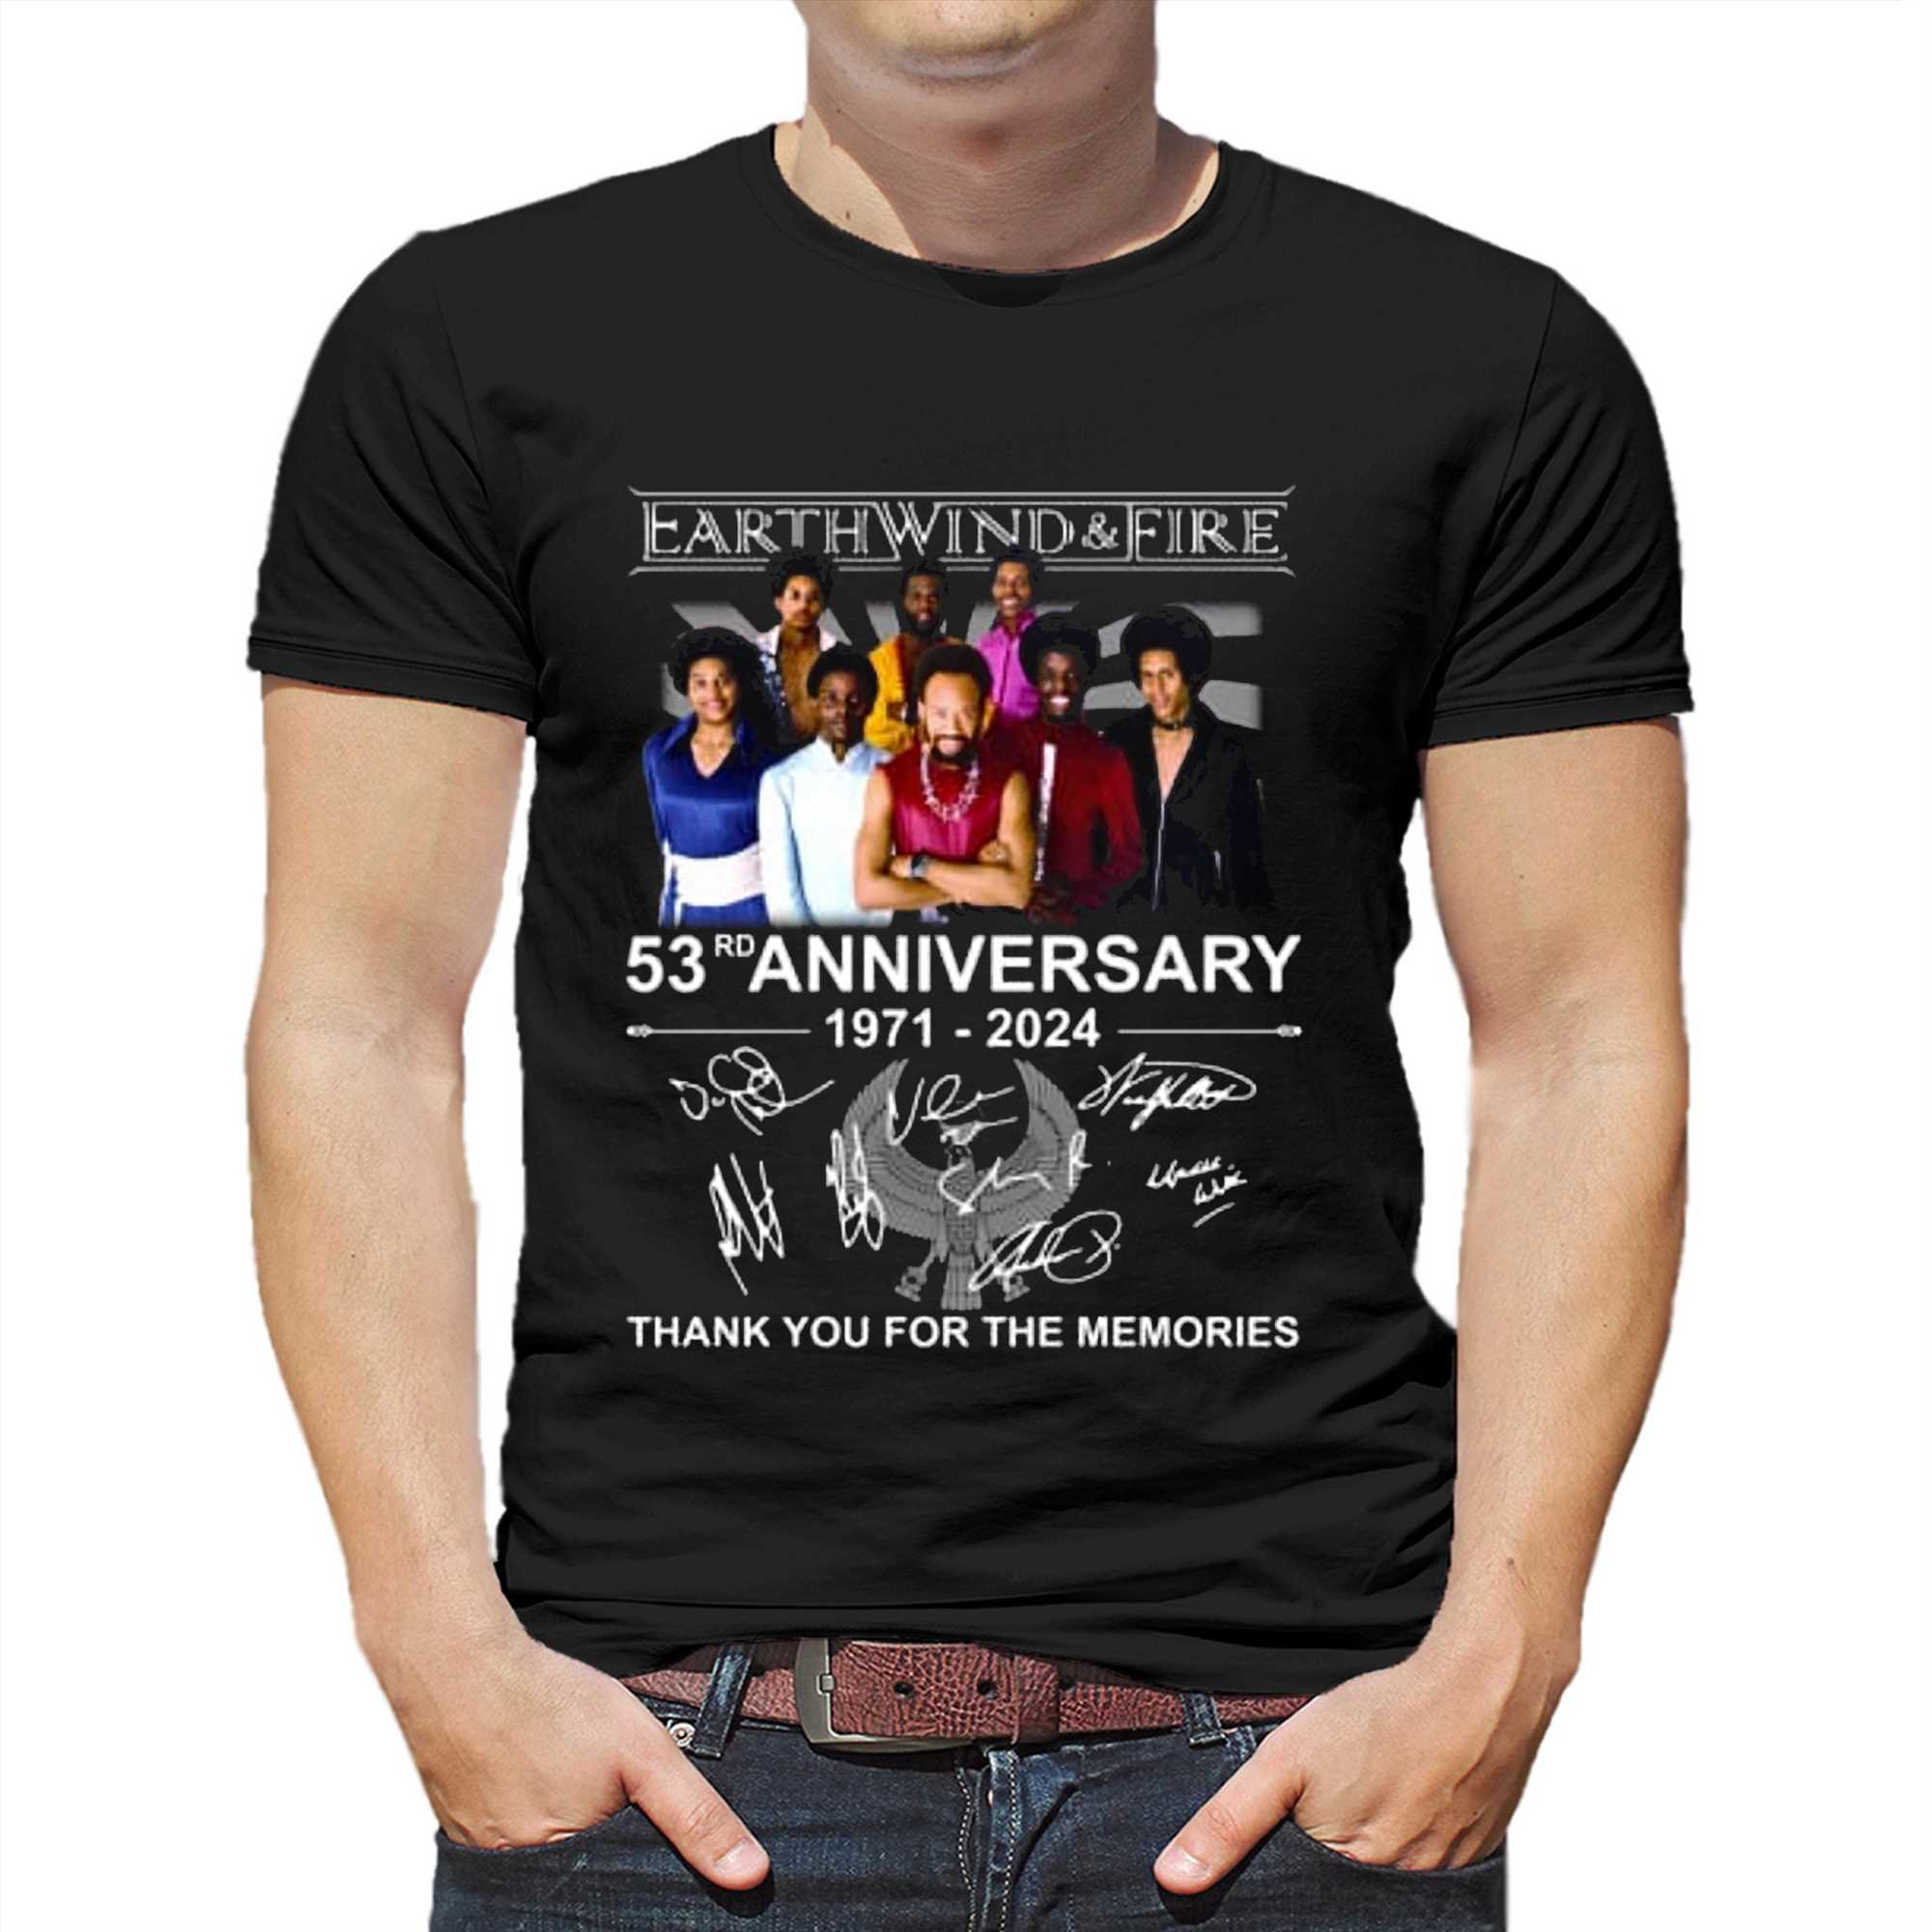 Earth Wind & Fire 53rd Anniversary 1971-2024 Thank You For The Memories T-shirt 